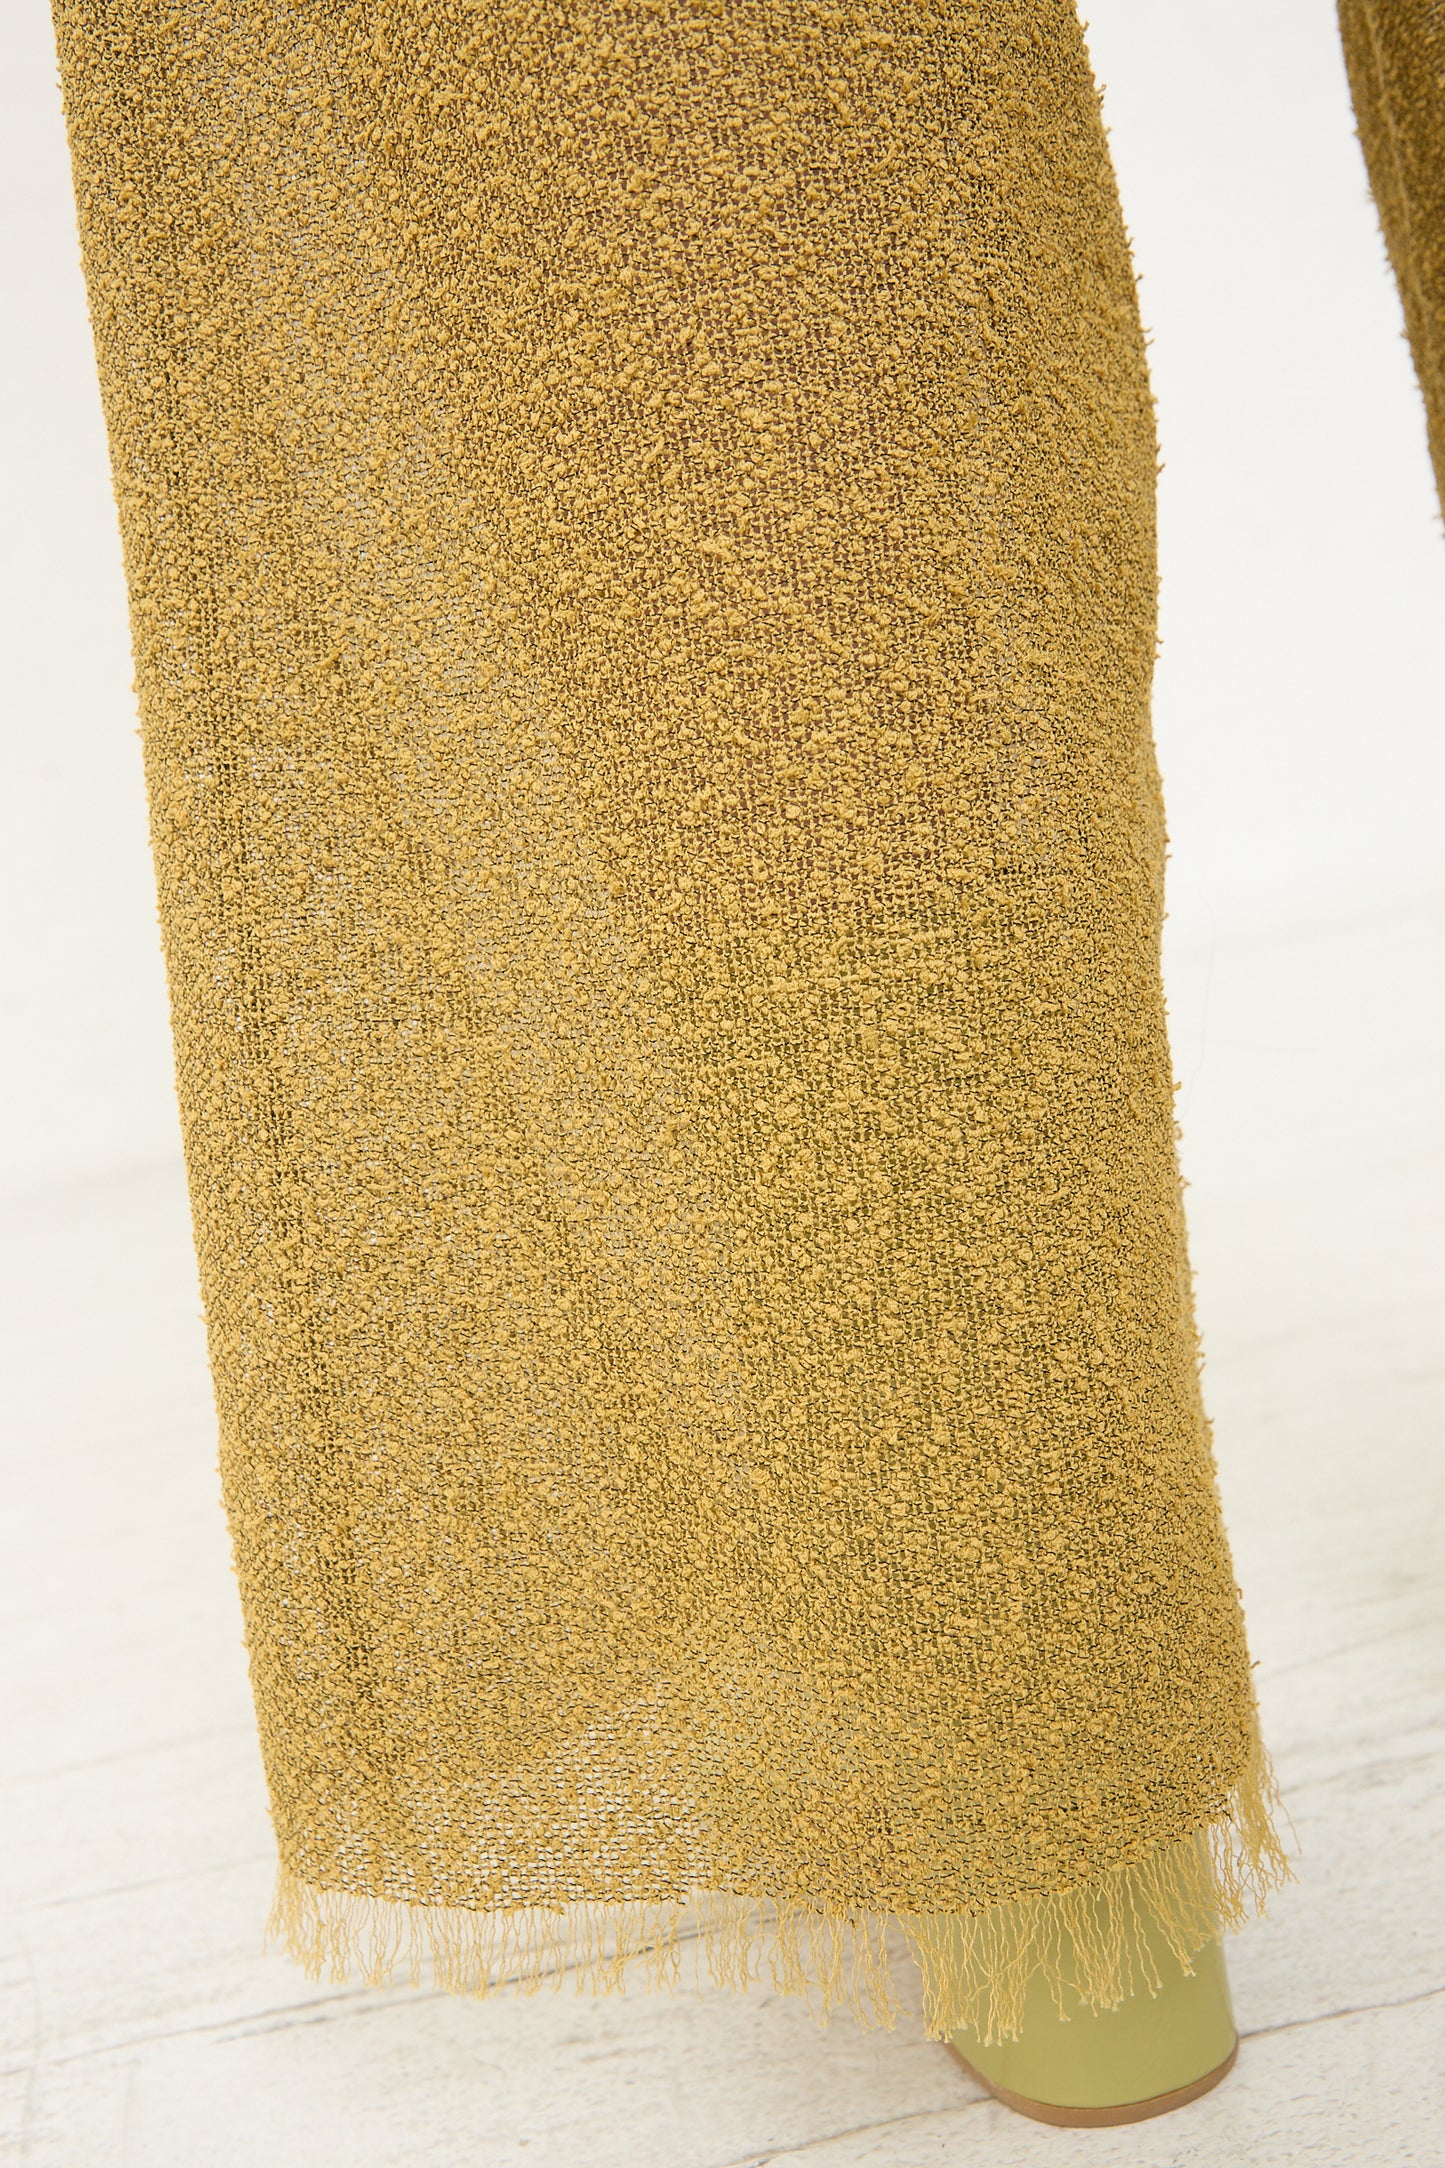 The back of a woman wearing Veronique Leroy's Tweed Frayed Trouser in Cumin.